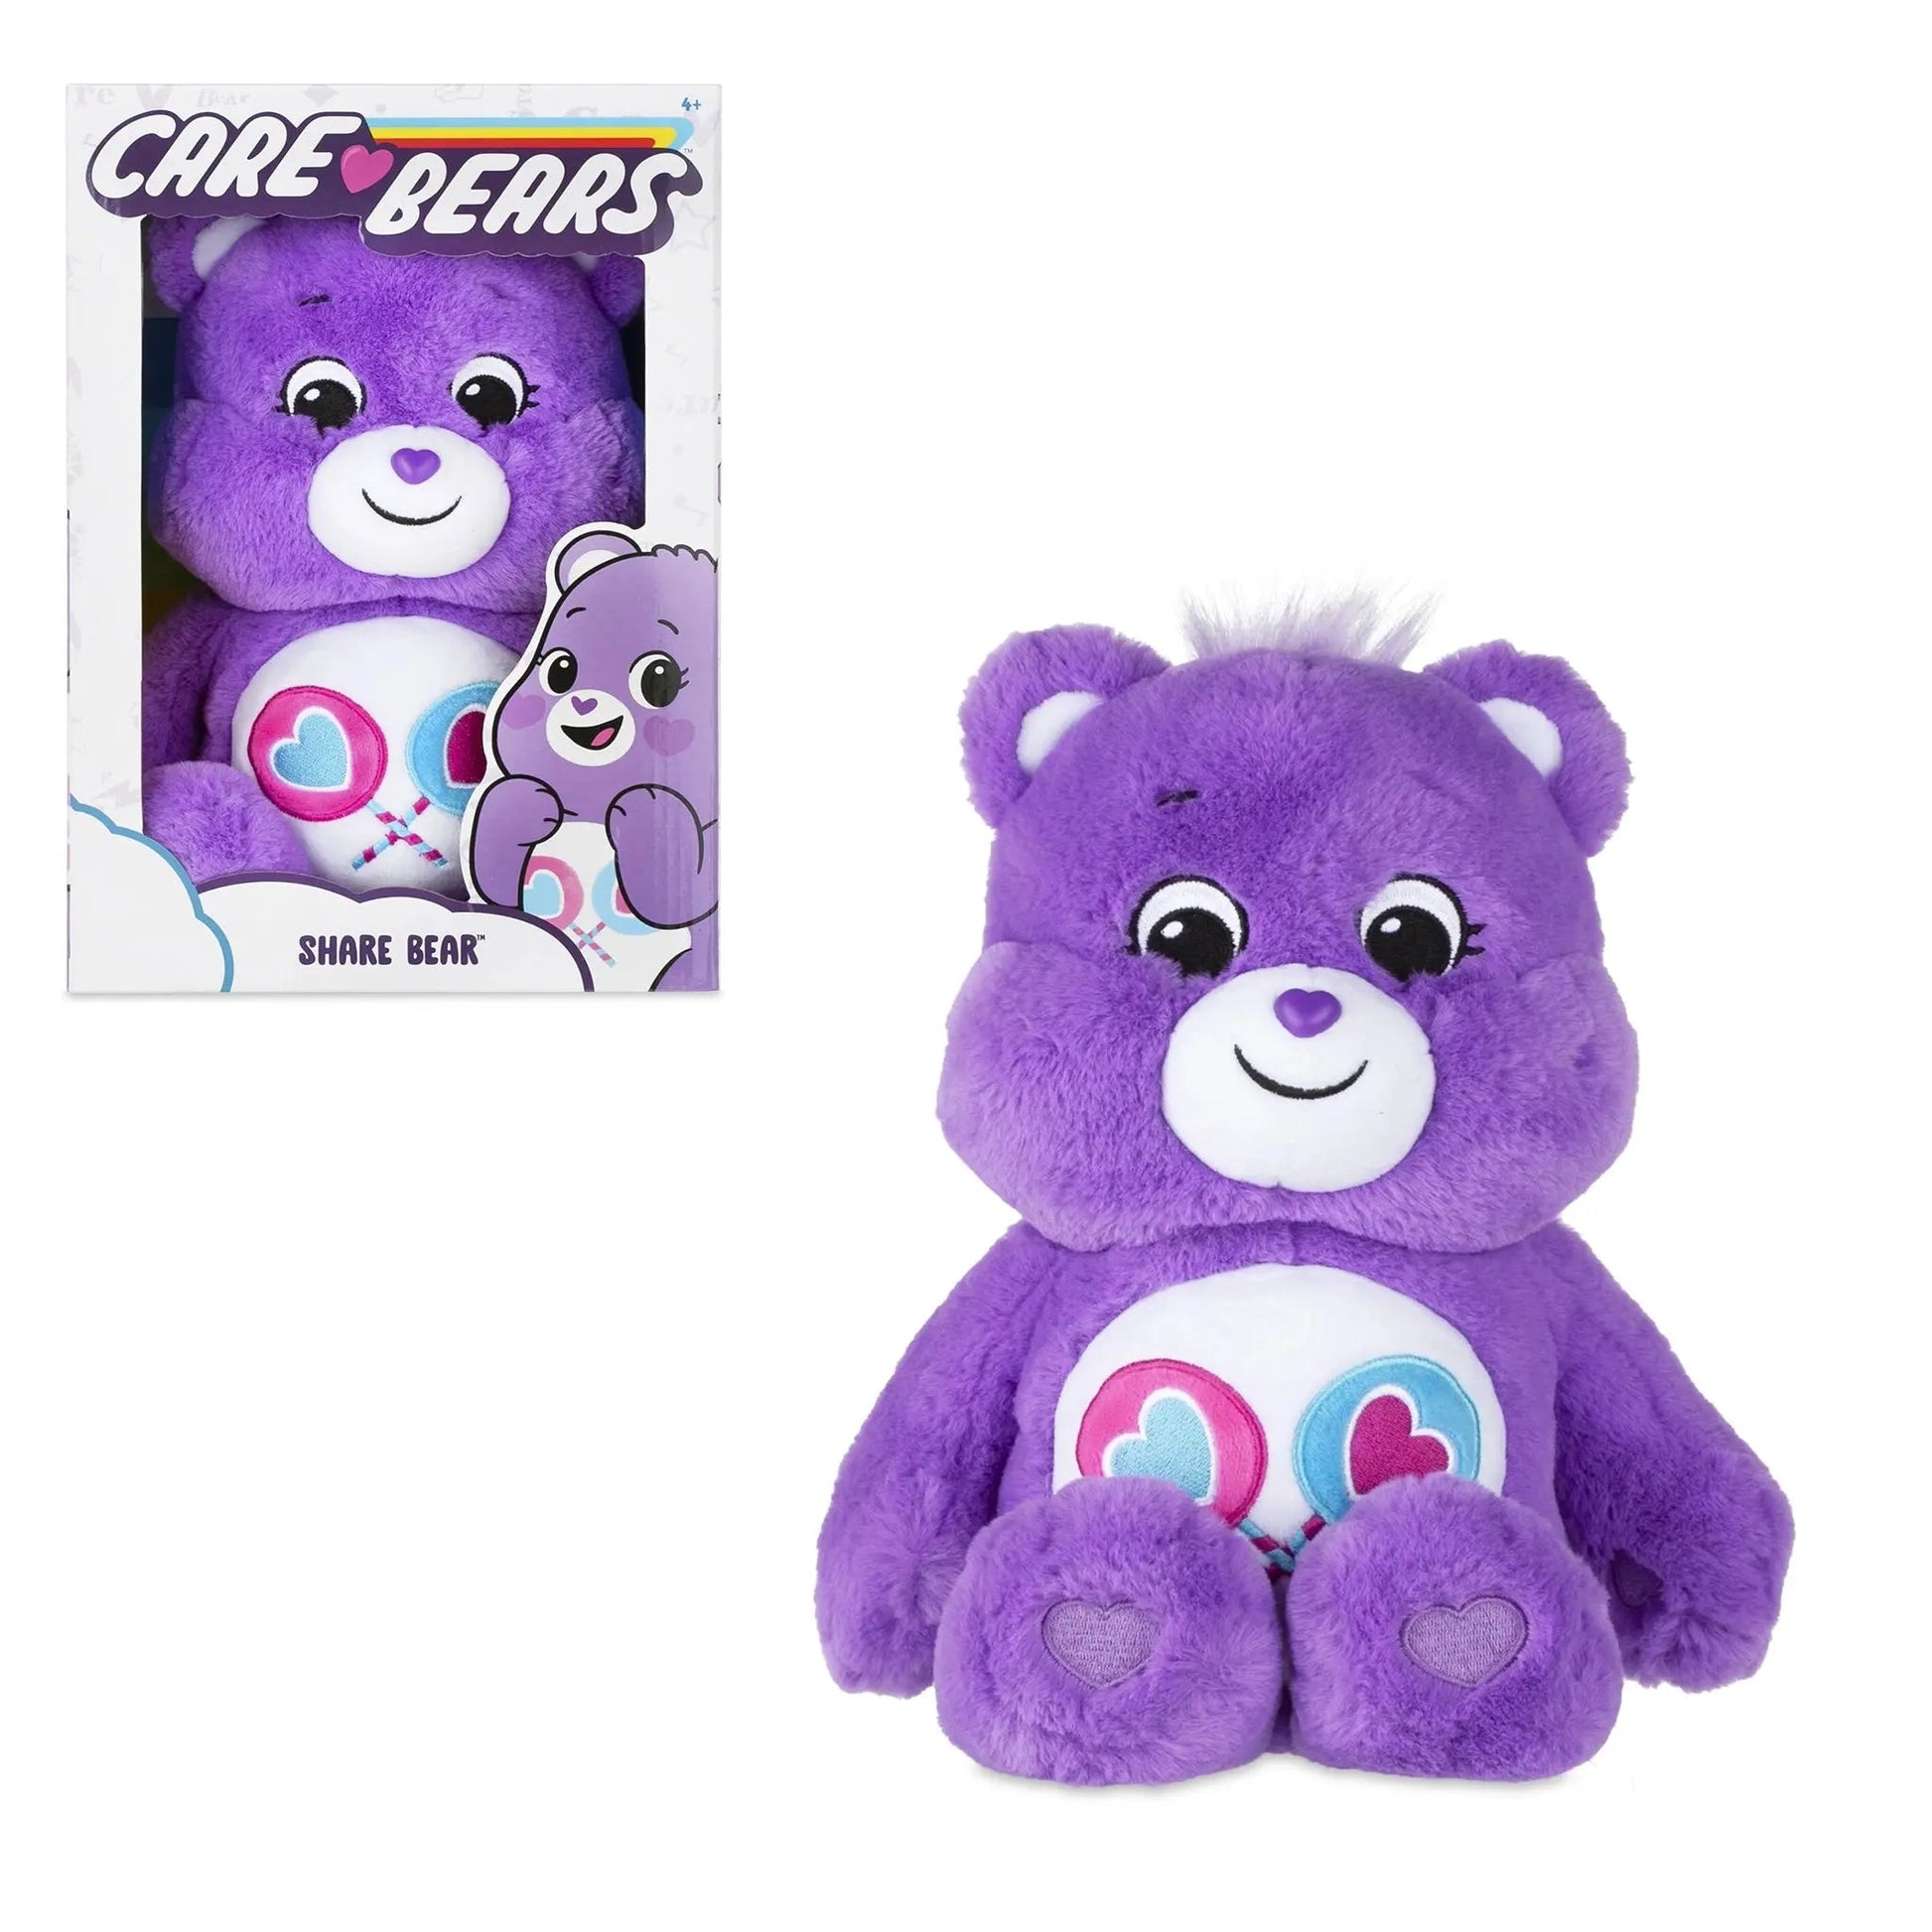 Care Bears 14" - Share Bear - ABGee - The Forgotten Toy Shop